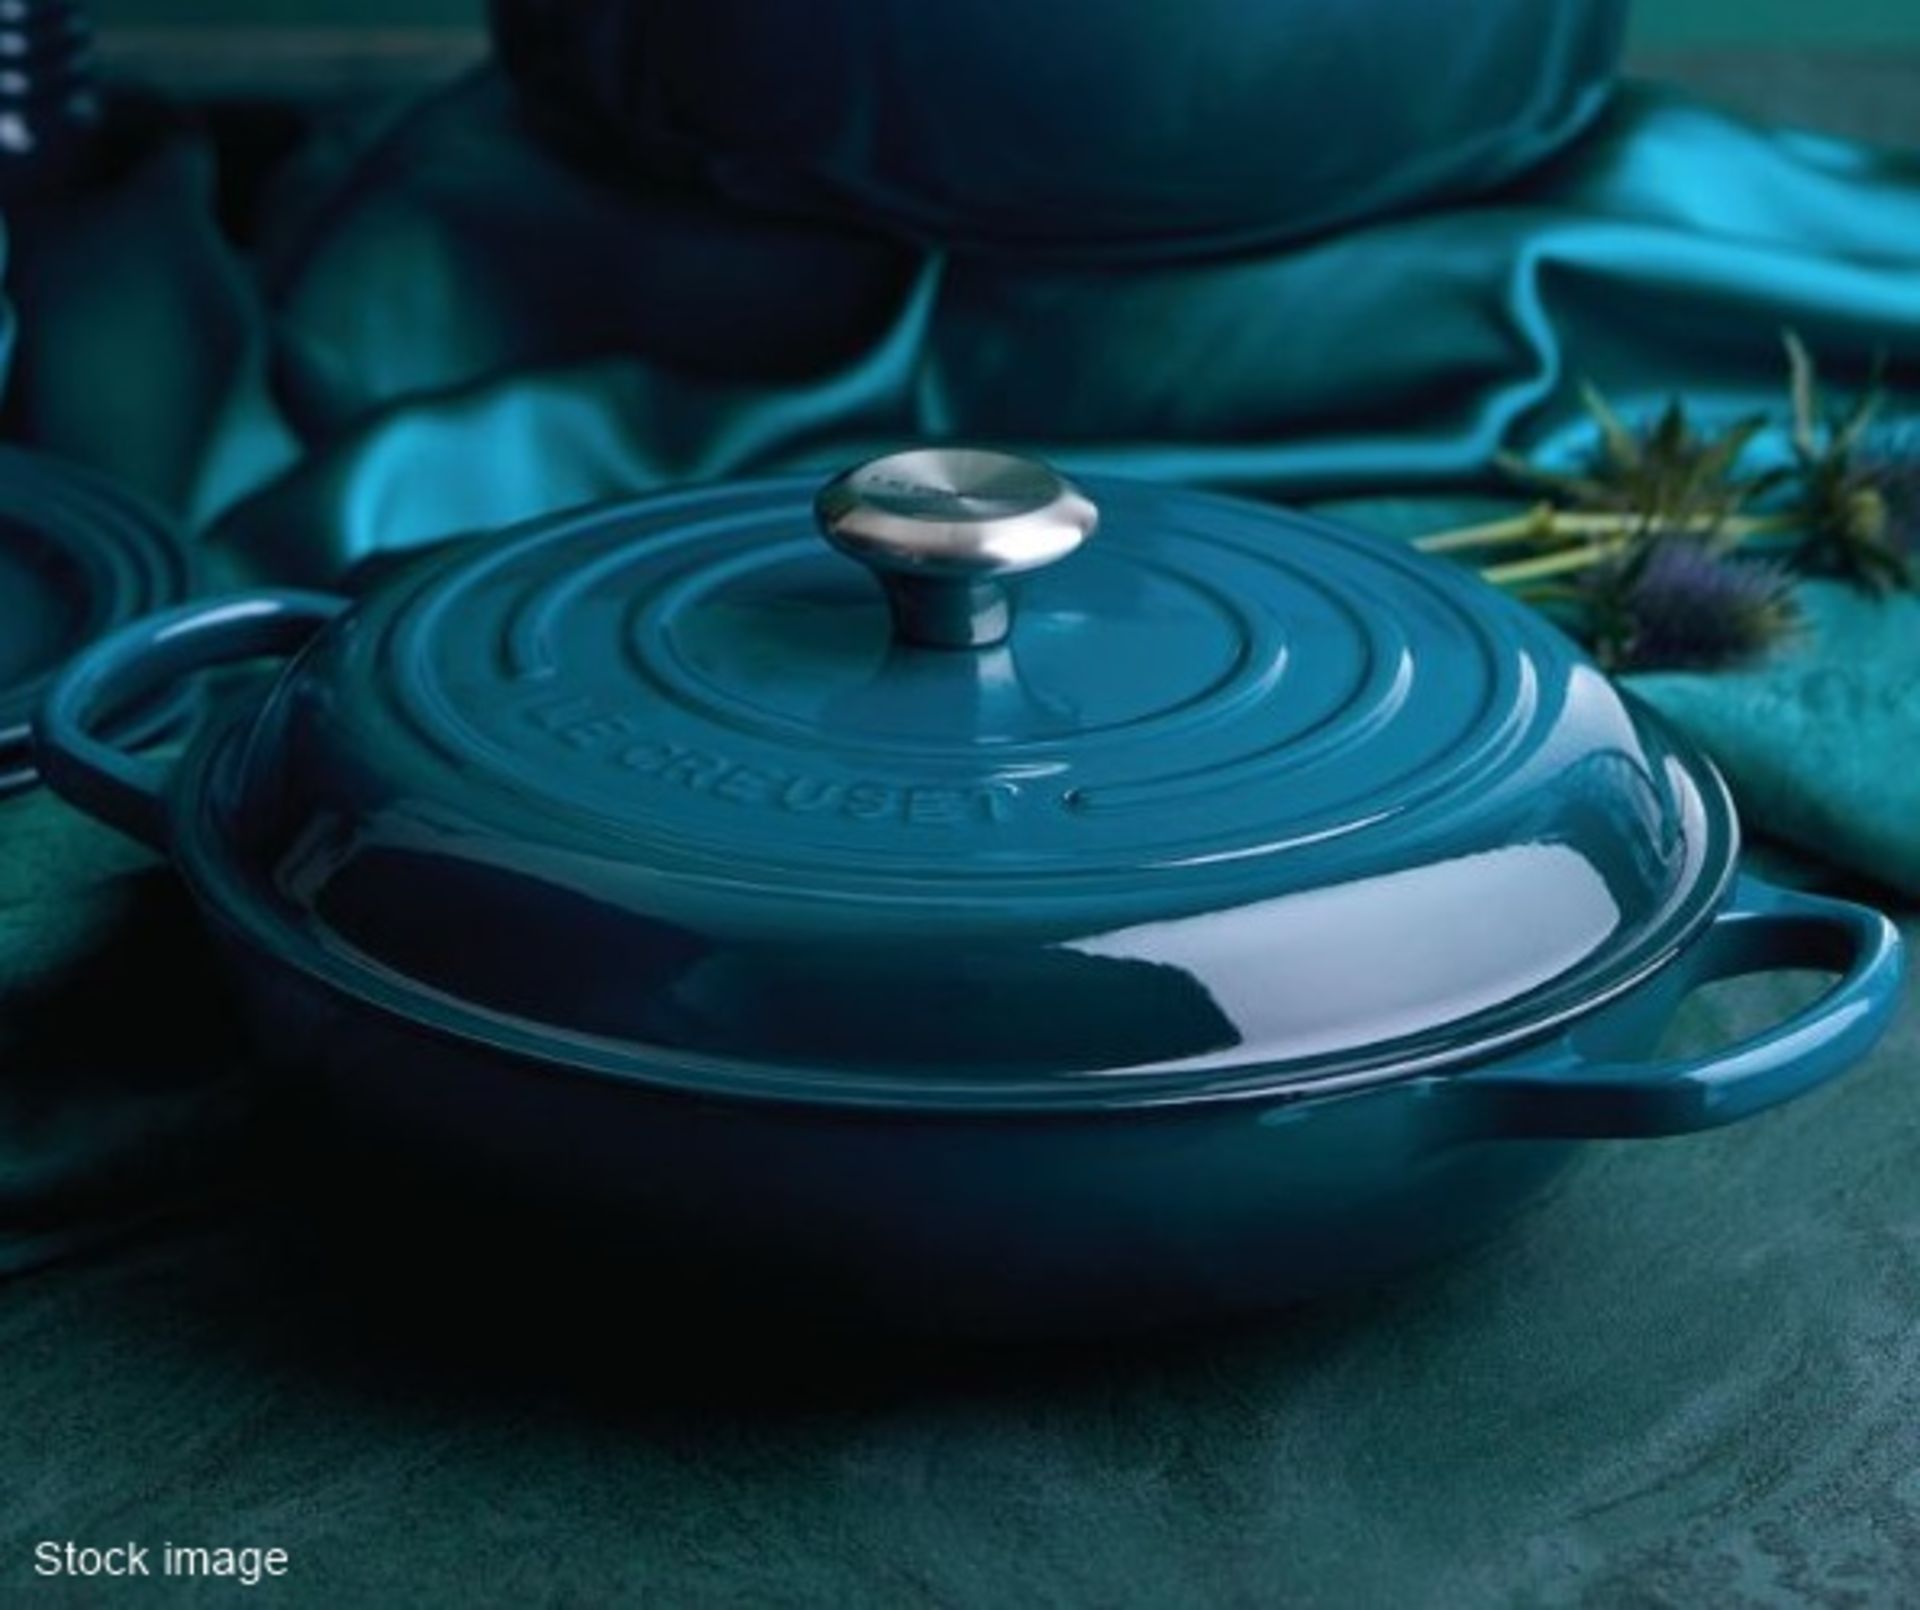 1 x LE CREUSET 'Signature' Enamelled Cast Iron Shallow Casserole Dish In Teal - RRP £270.00